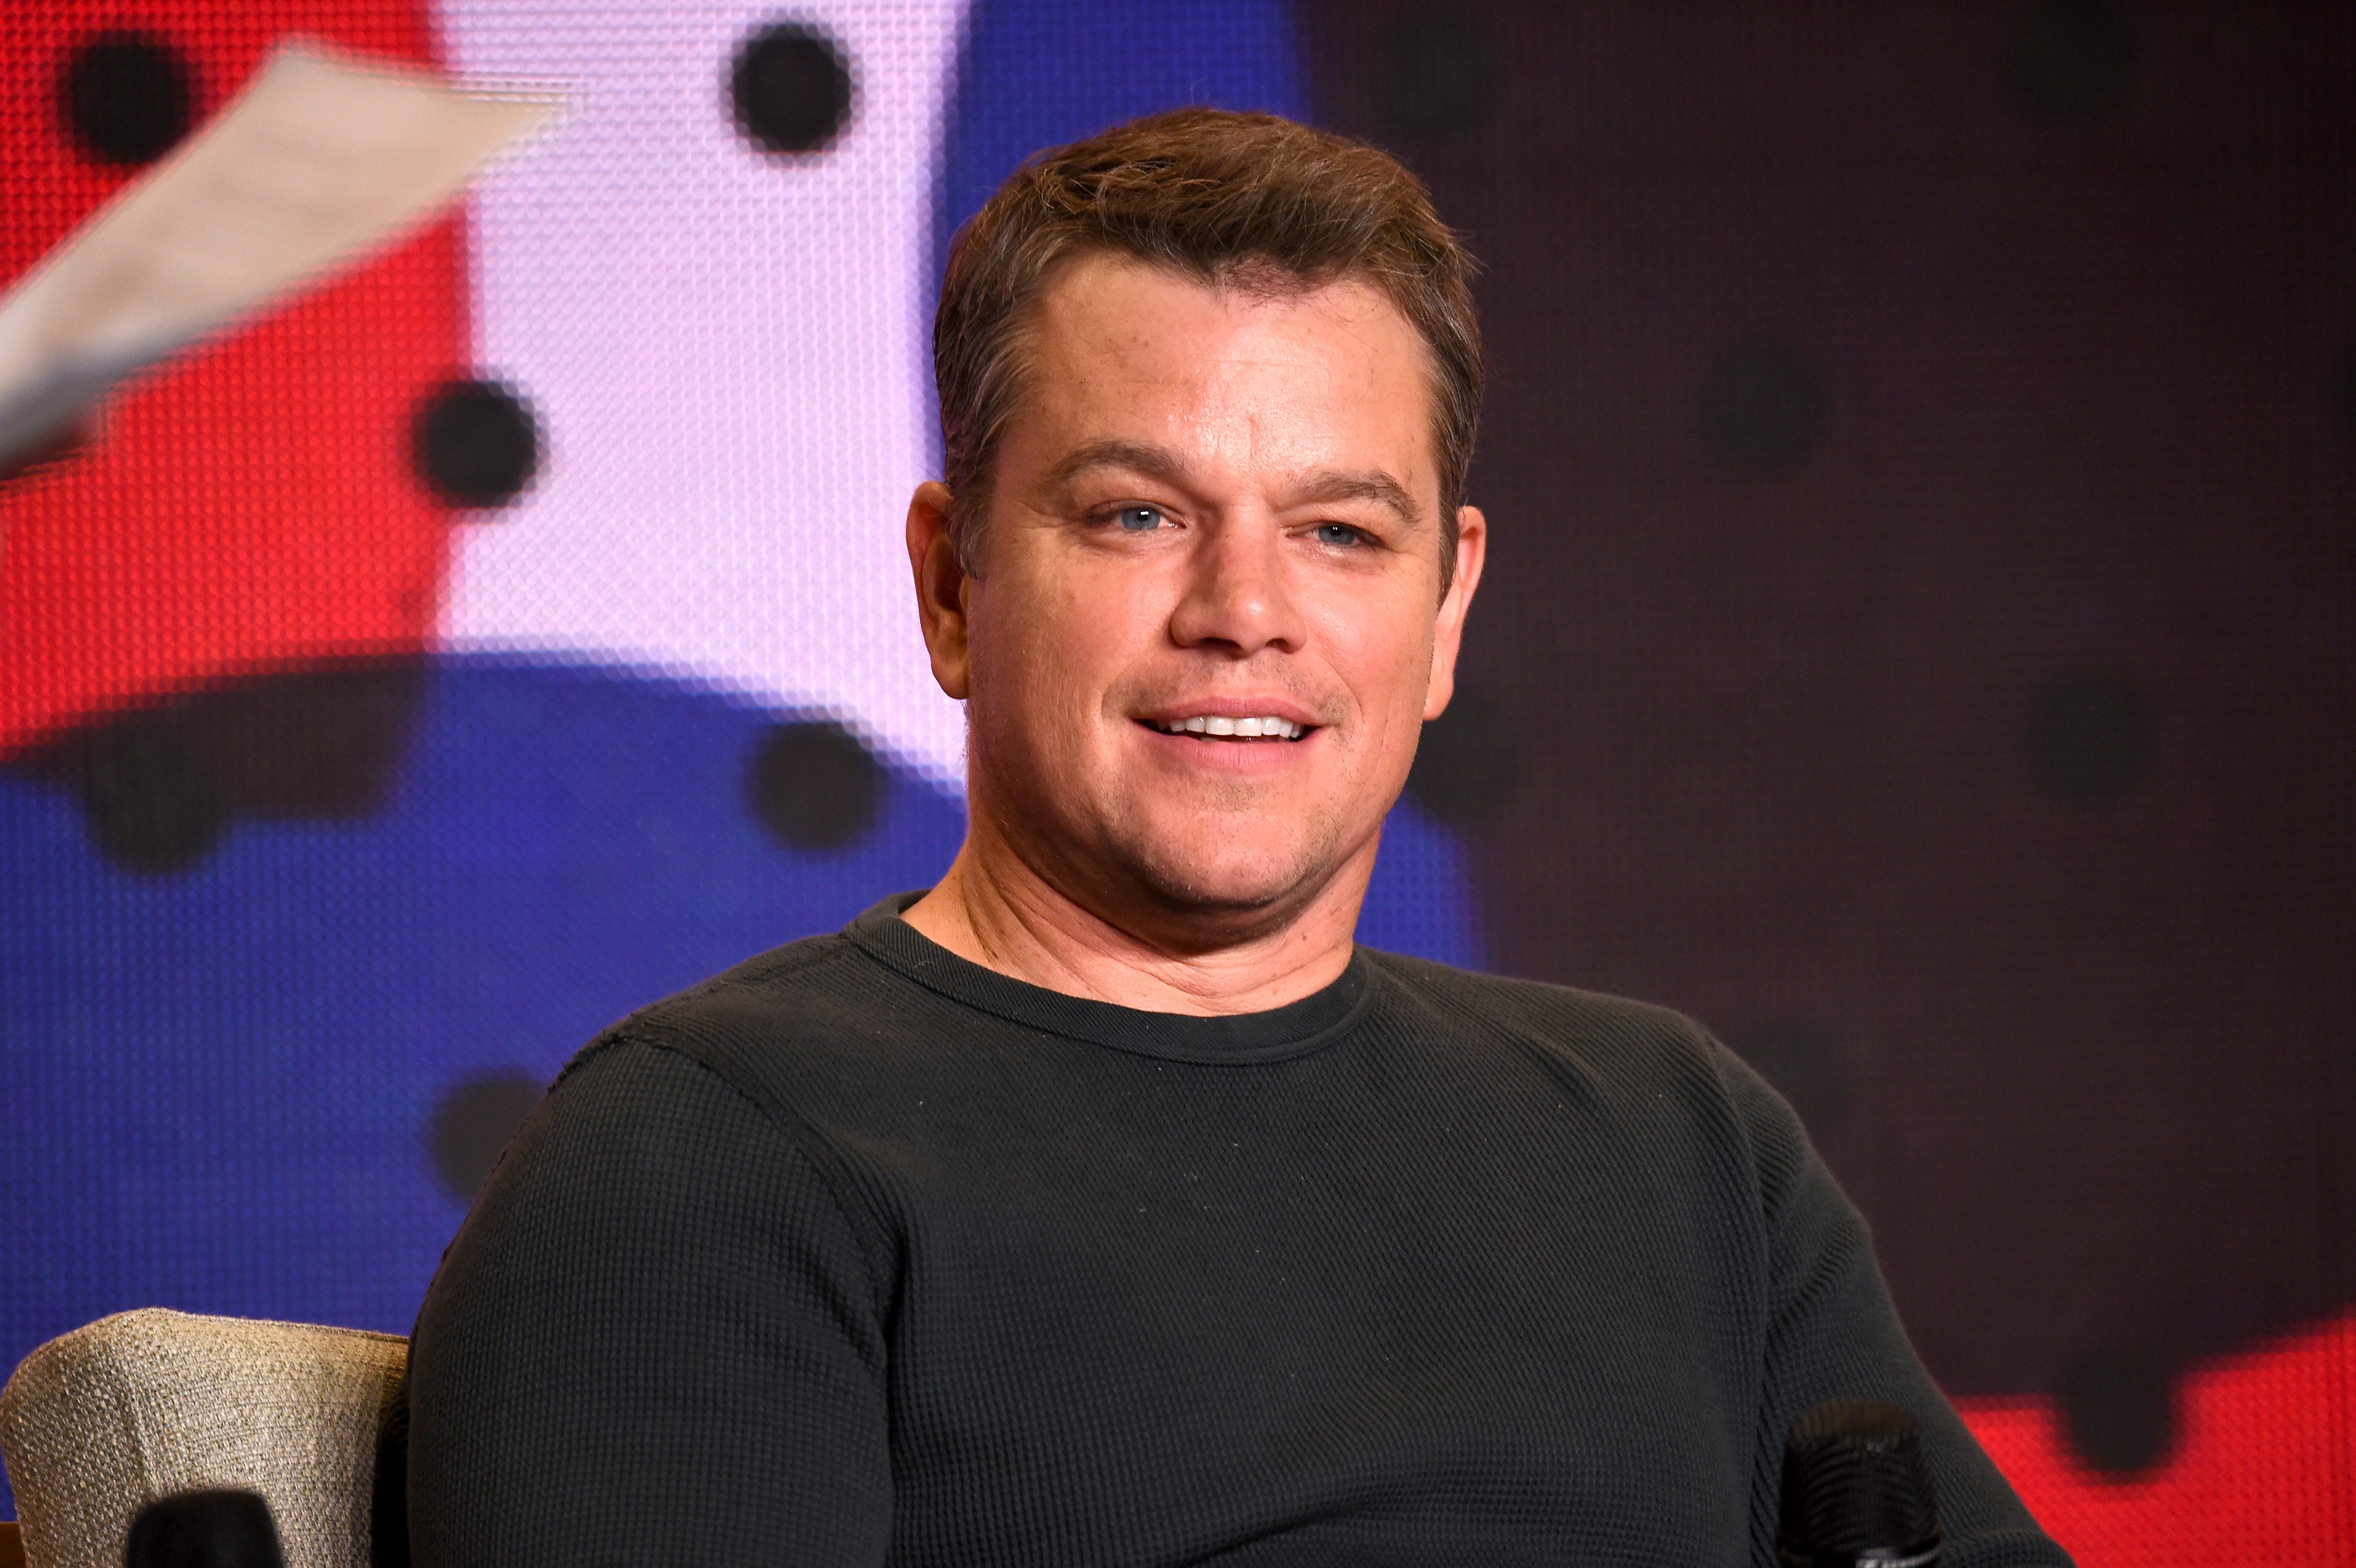 Matt Damon speaks onstage during the "Downsizing" press conference during the 2017 Toronto International Film Festival at TIFF Bell Lightbox on September 10, 2017 in Toronto, Canada.  | Photo: GettyImages